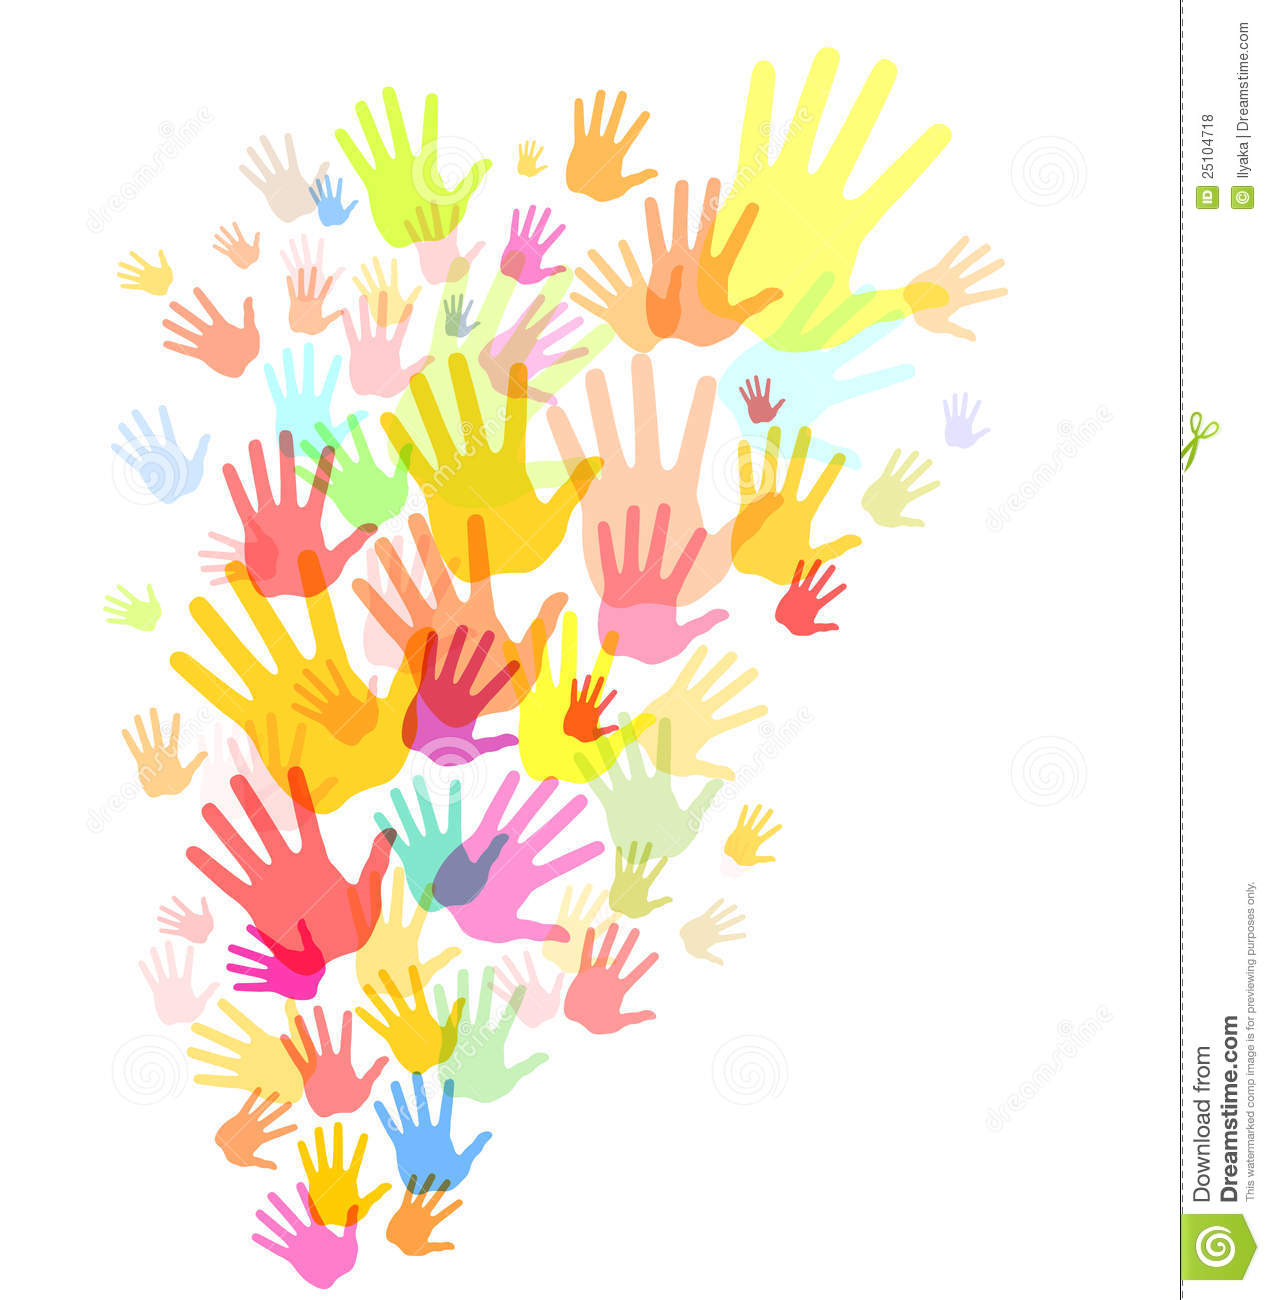 Colorful Hand Prints Background Free